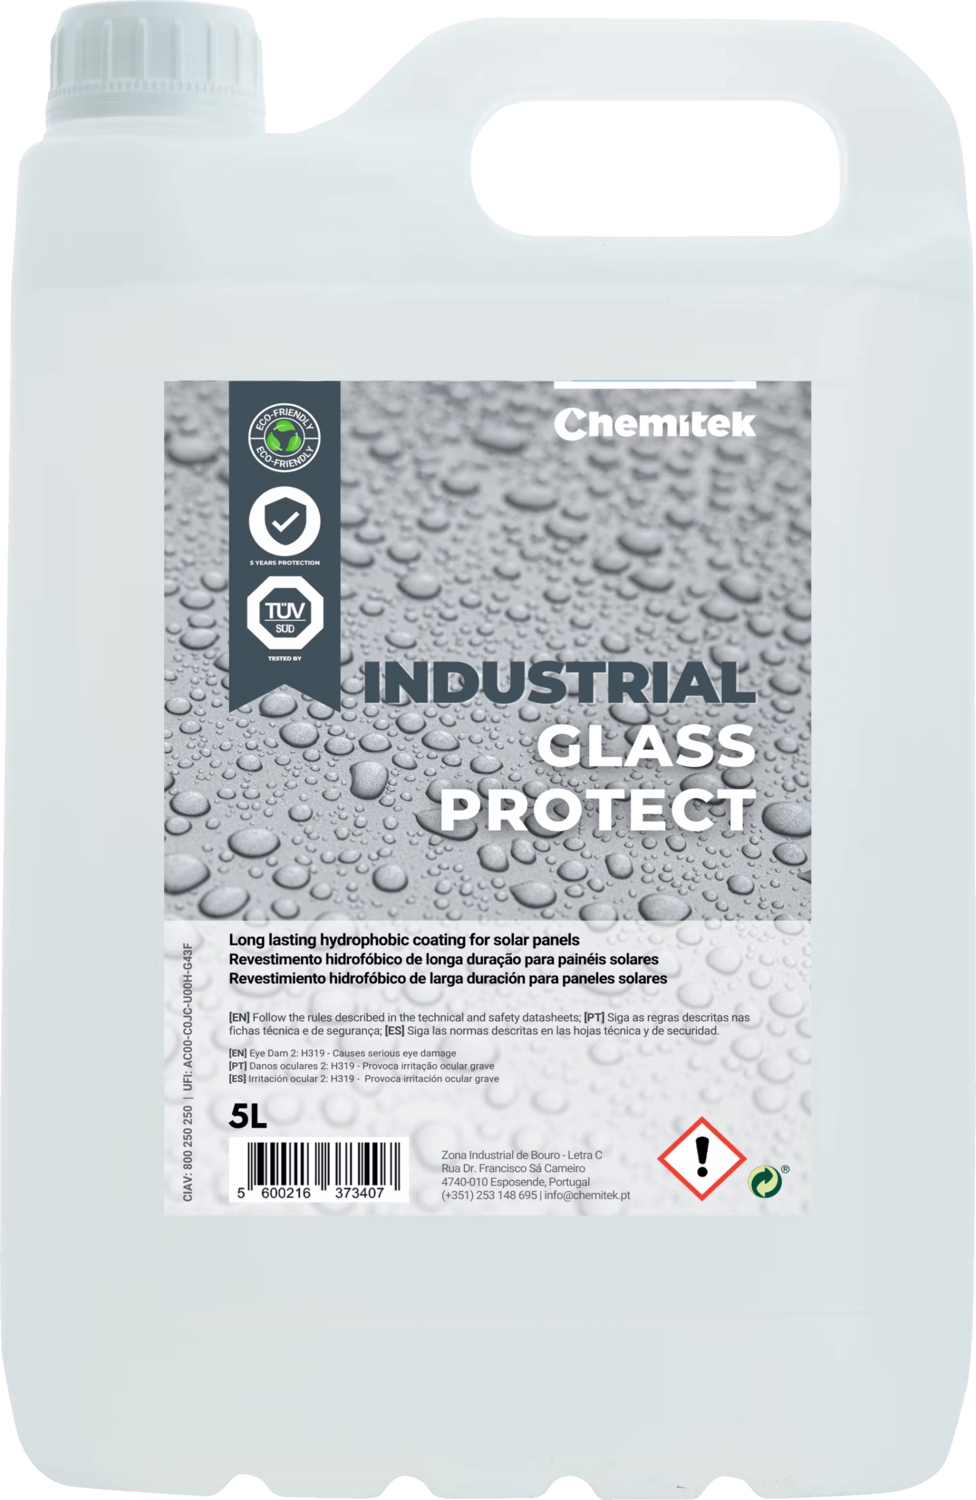 IGP – Industrial Glass Protect